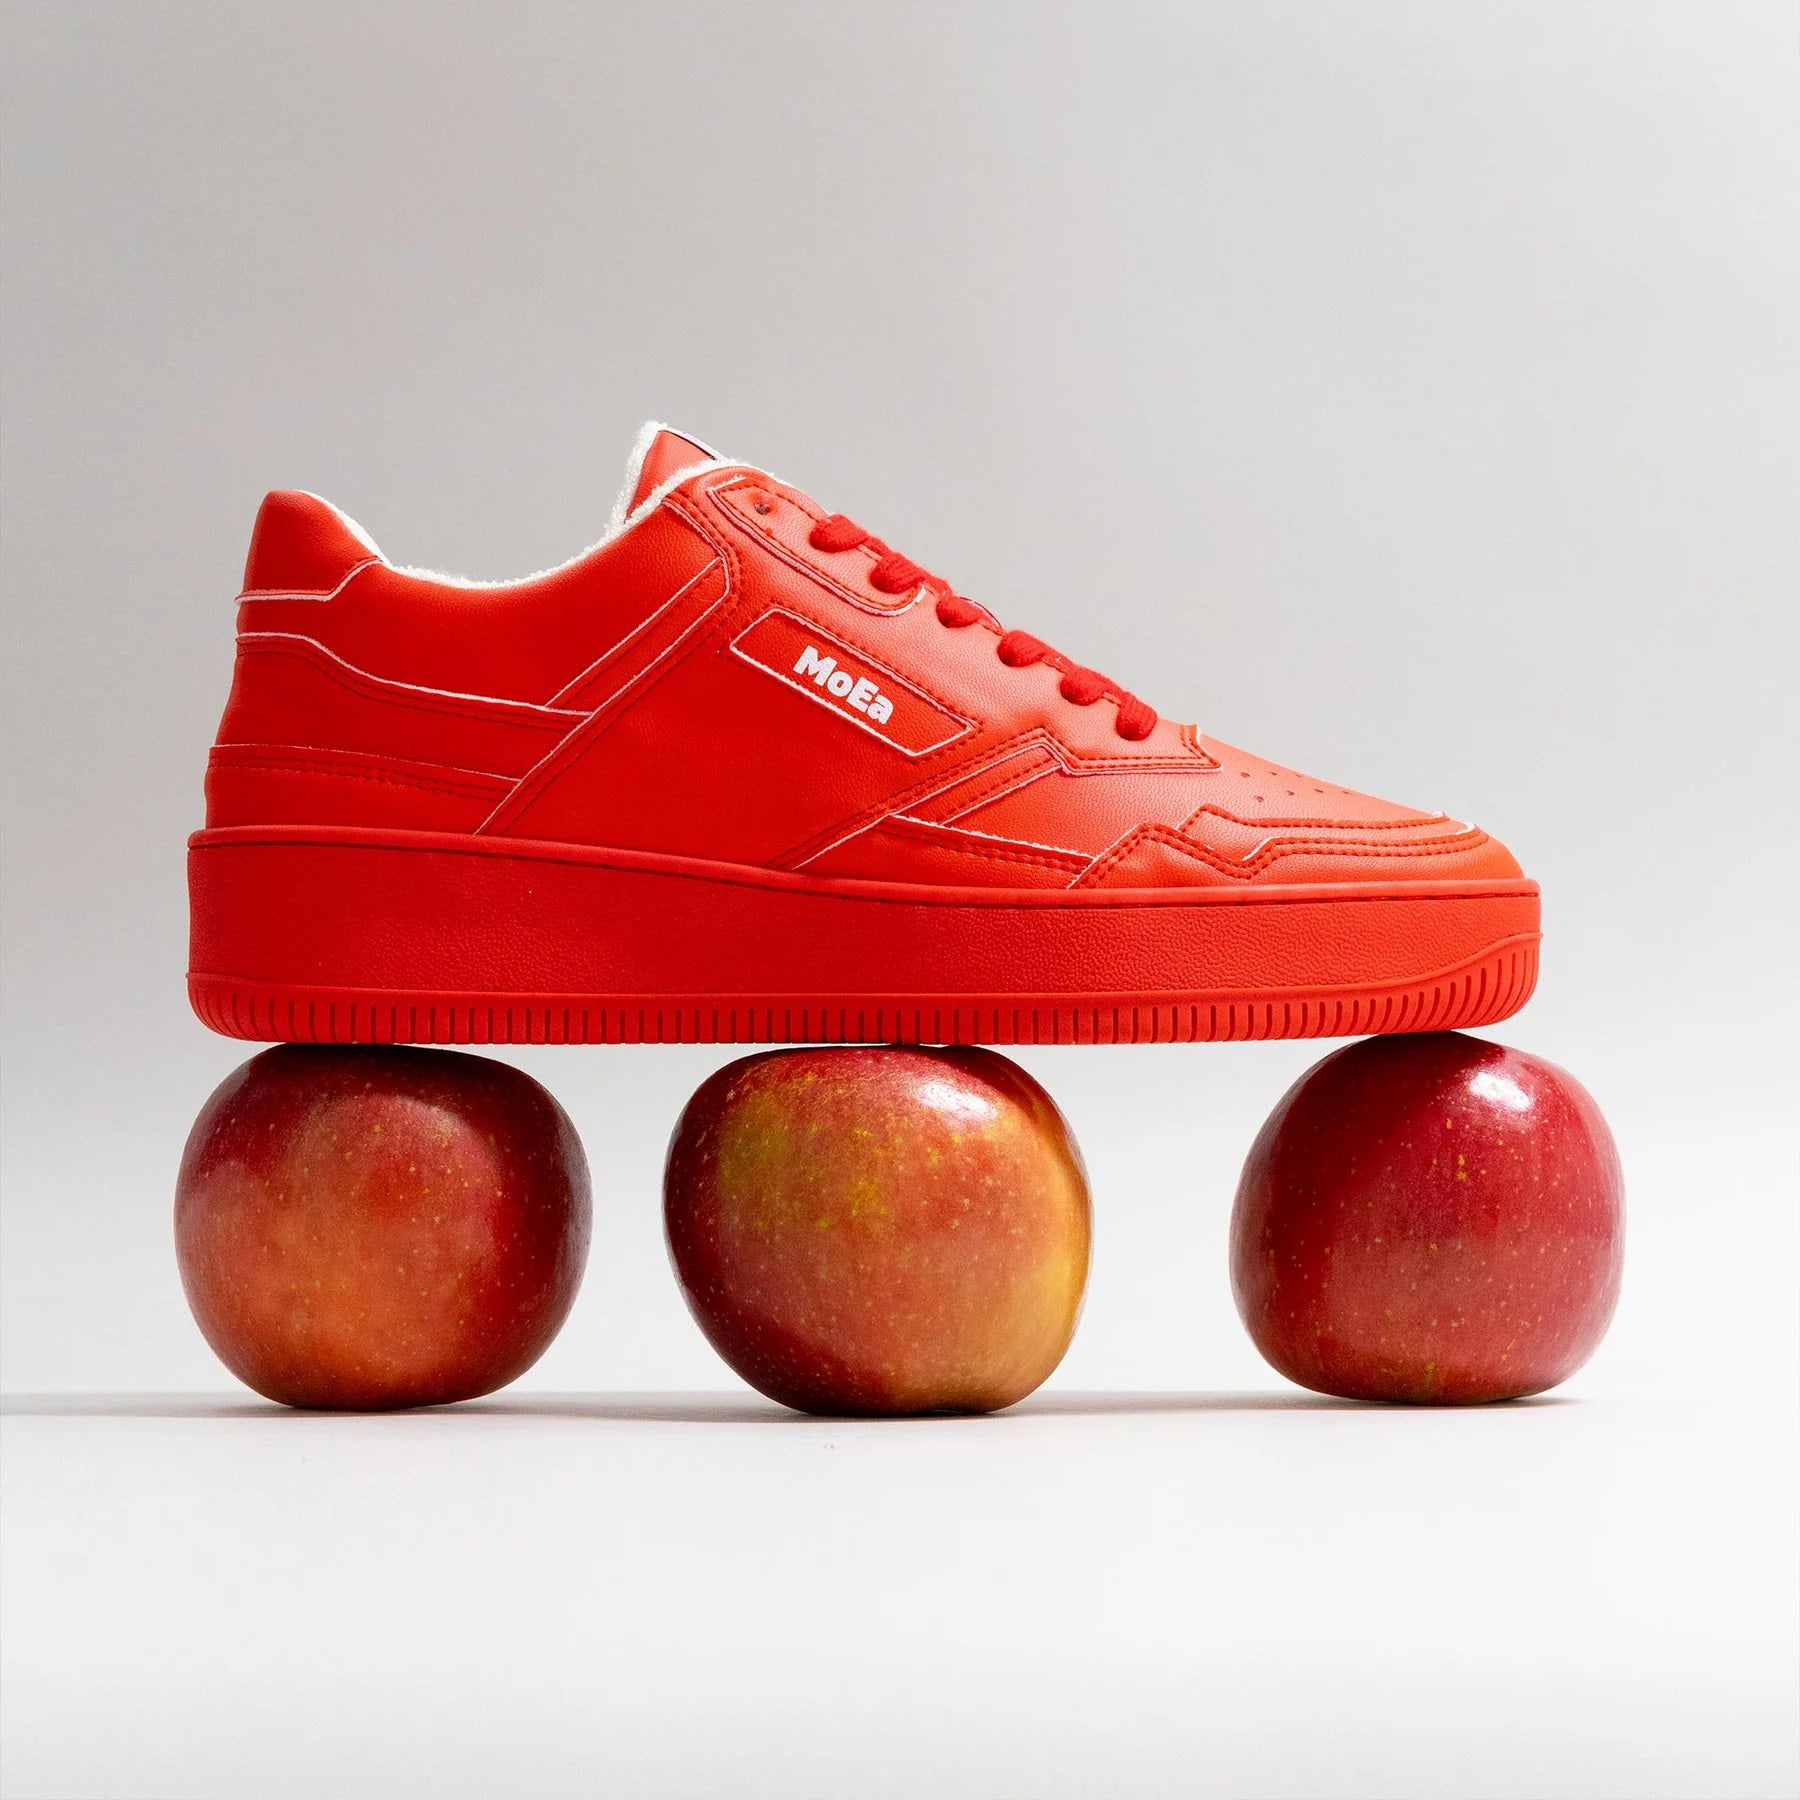 Sneakers GEN1 Apple Full Red Recycled Materials